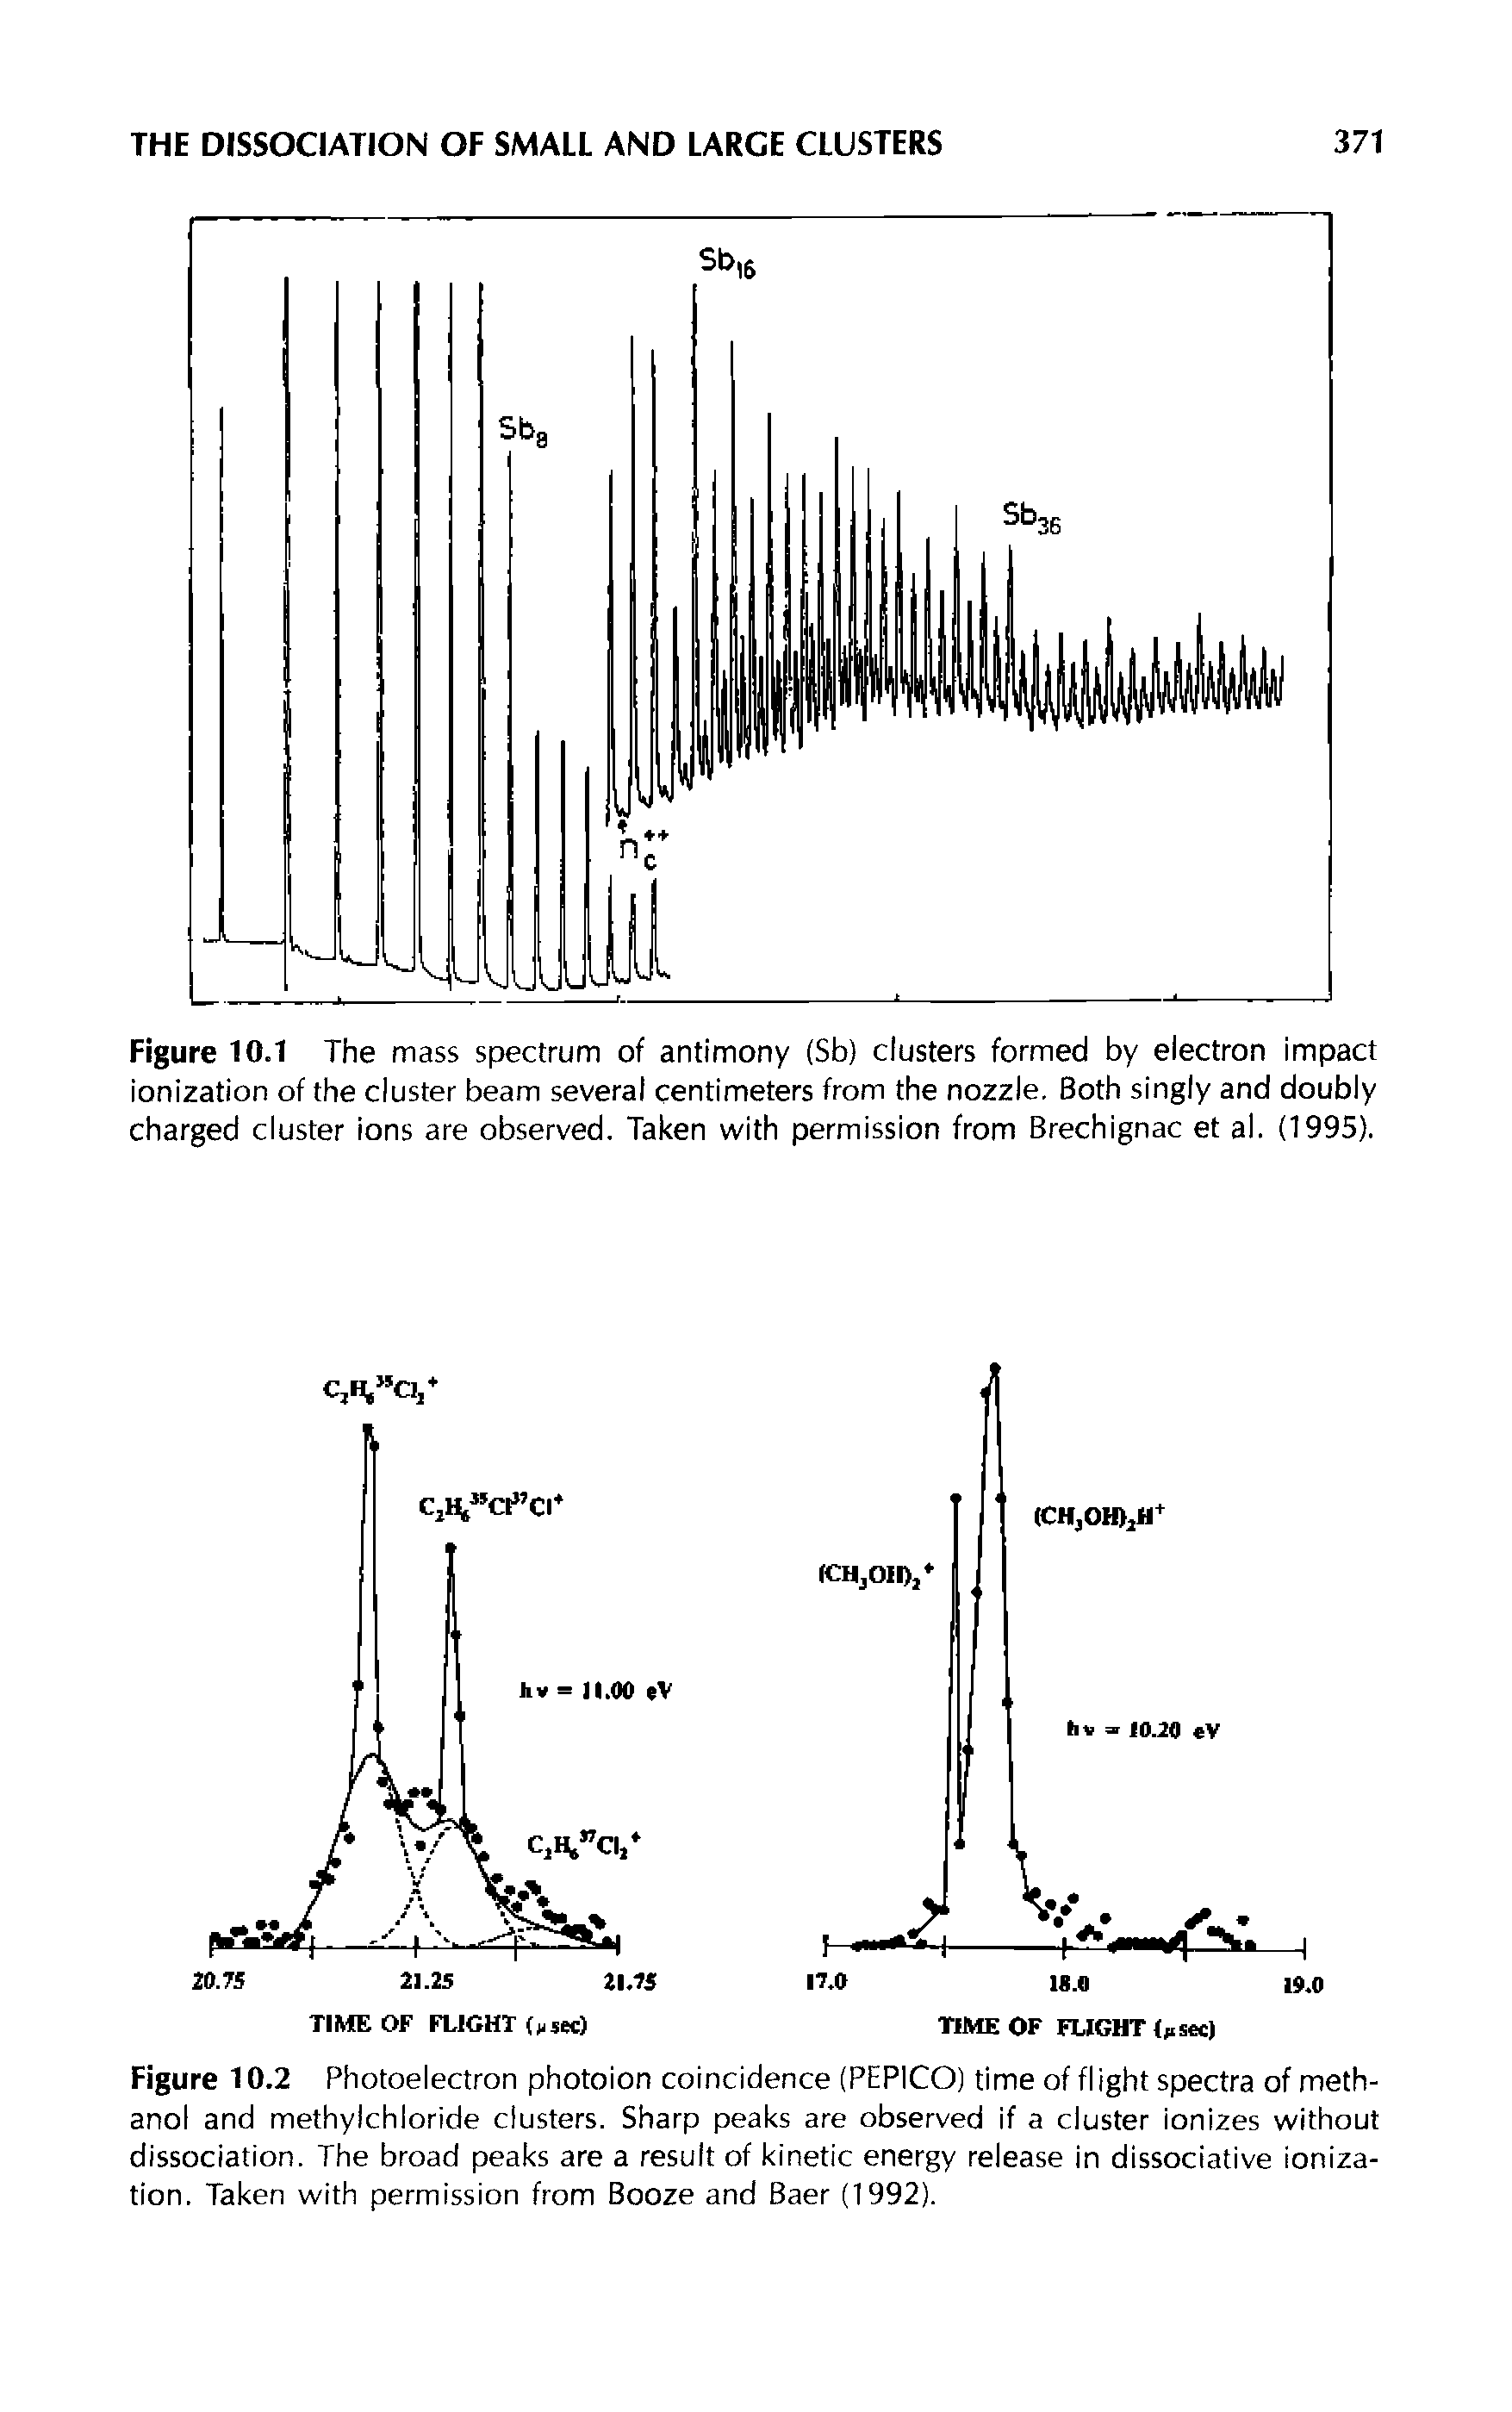 Figure 10.1 The mass spectrum of antimony (Sb) clusters formed by electron impact ionization of the cluster beam several centimeters from the nozzle. Both singly and doubly charged cluster ions are observed. Taken with permission from Brechignac et al. (1995).